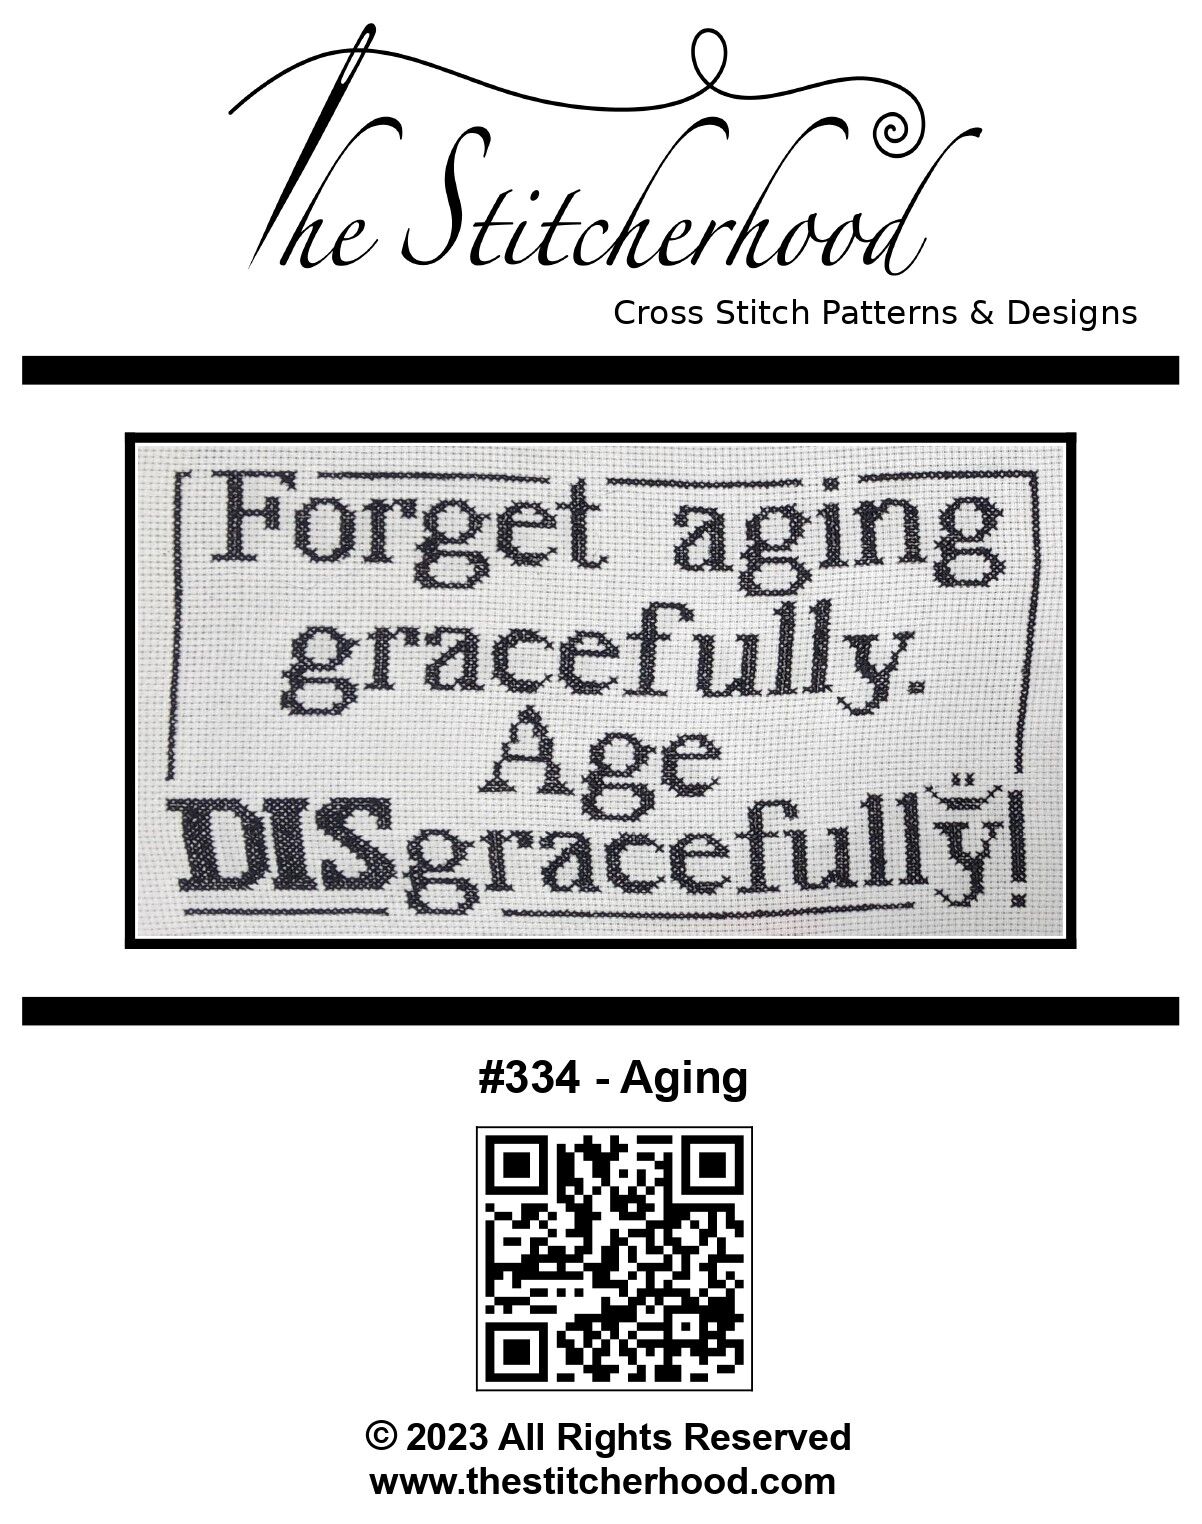 A funny cross stitch pattern about aging